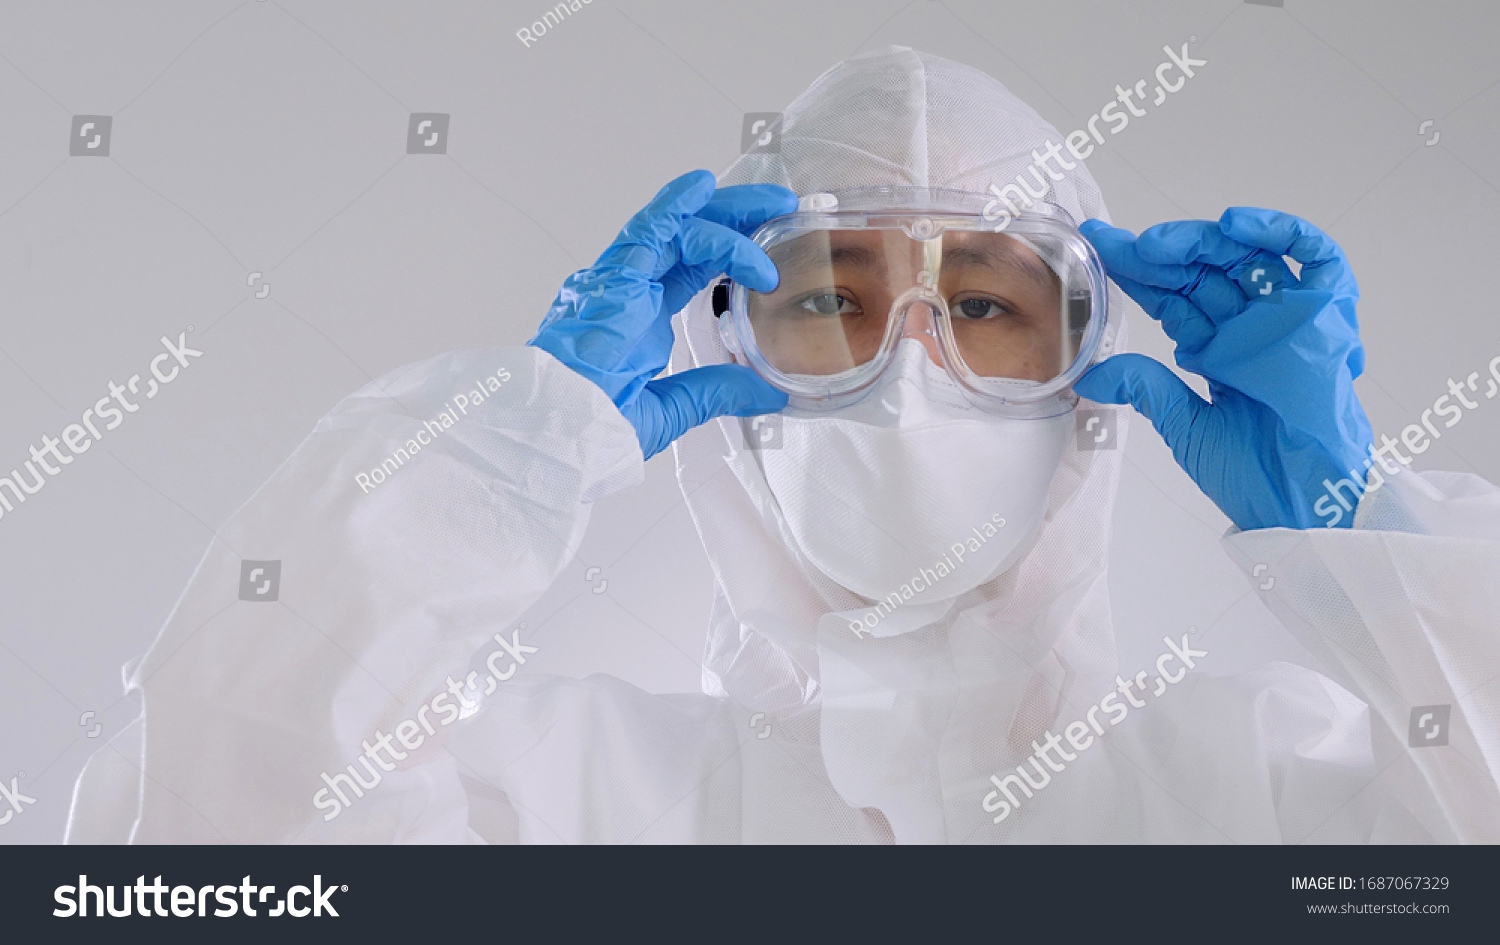 Asian doctor in protective hazmat PPE suit wearing face mask and eyeglasses #1687067329